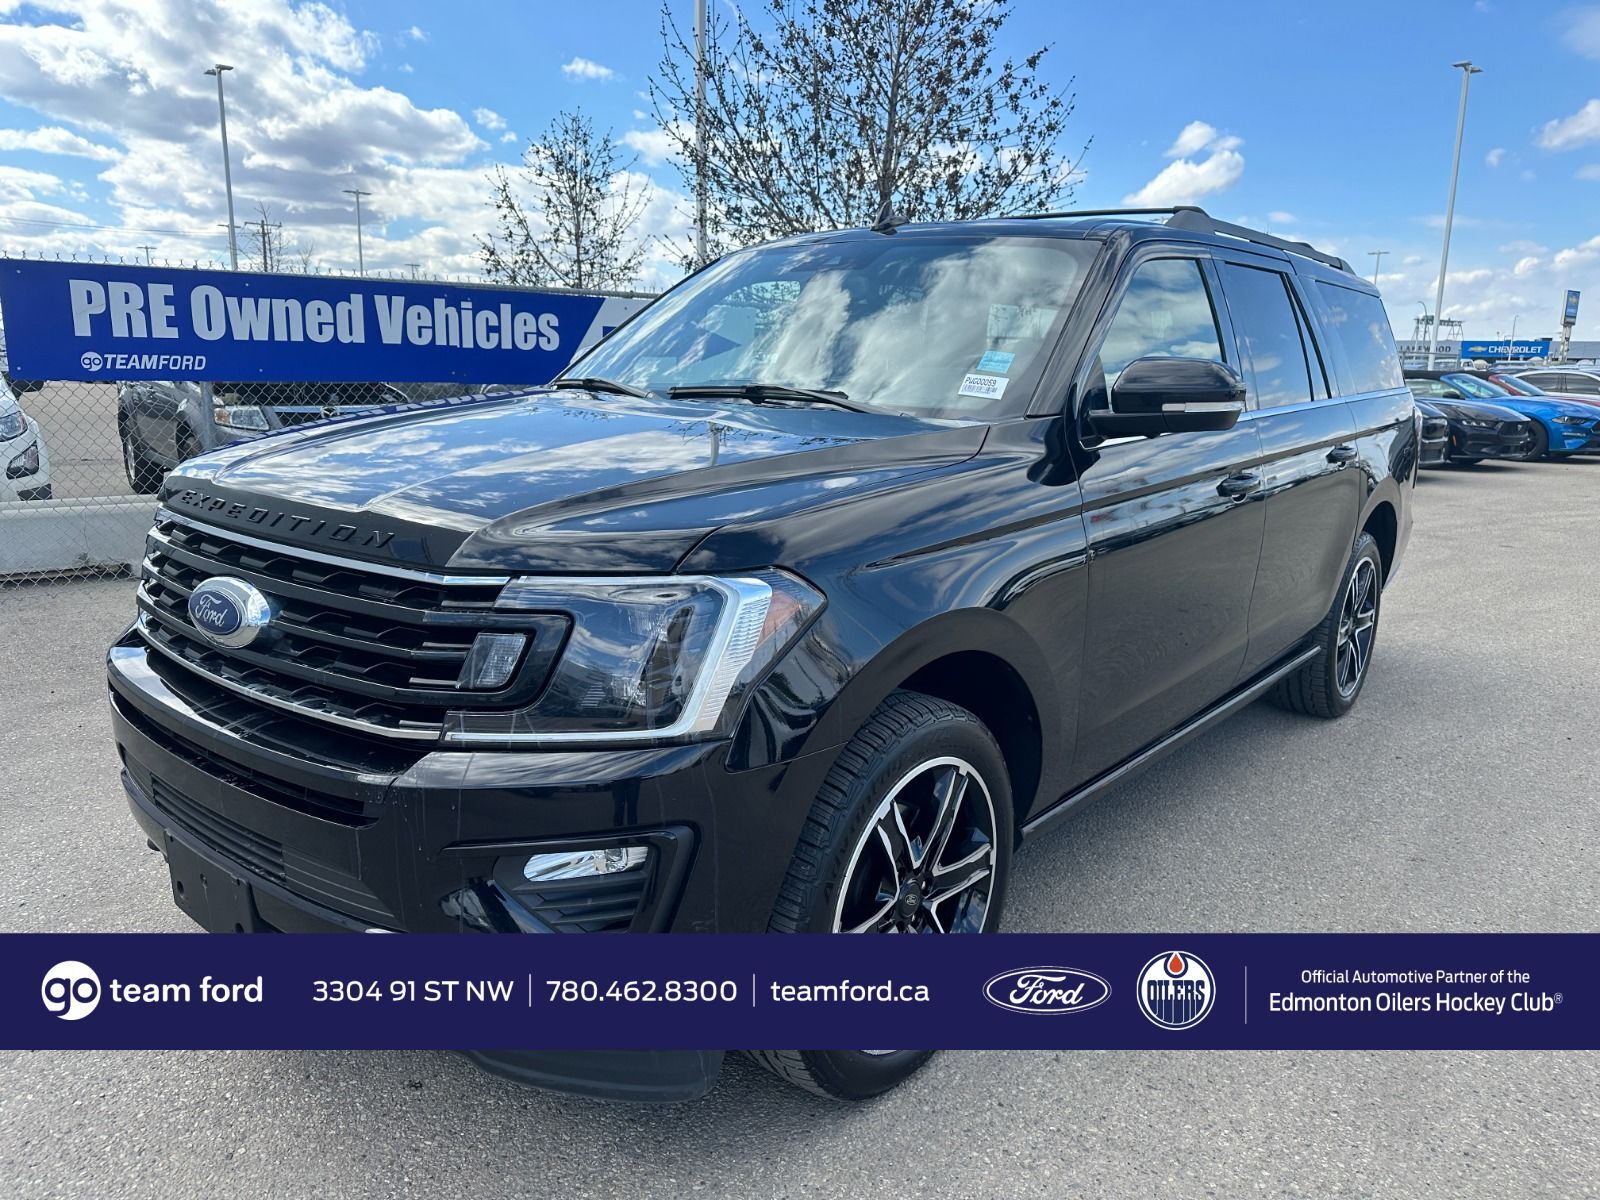 2021 Ford Expedition 3.5L V6 ECOBOOST ENG, LIMITED, CONVENIENCE PKG, FO